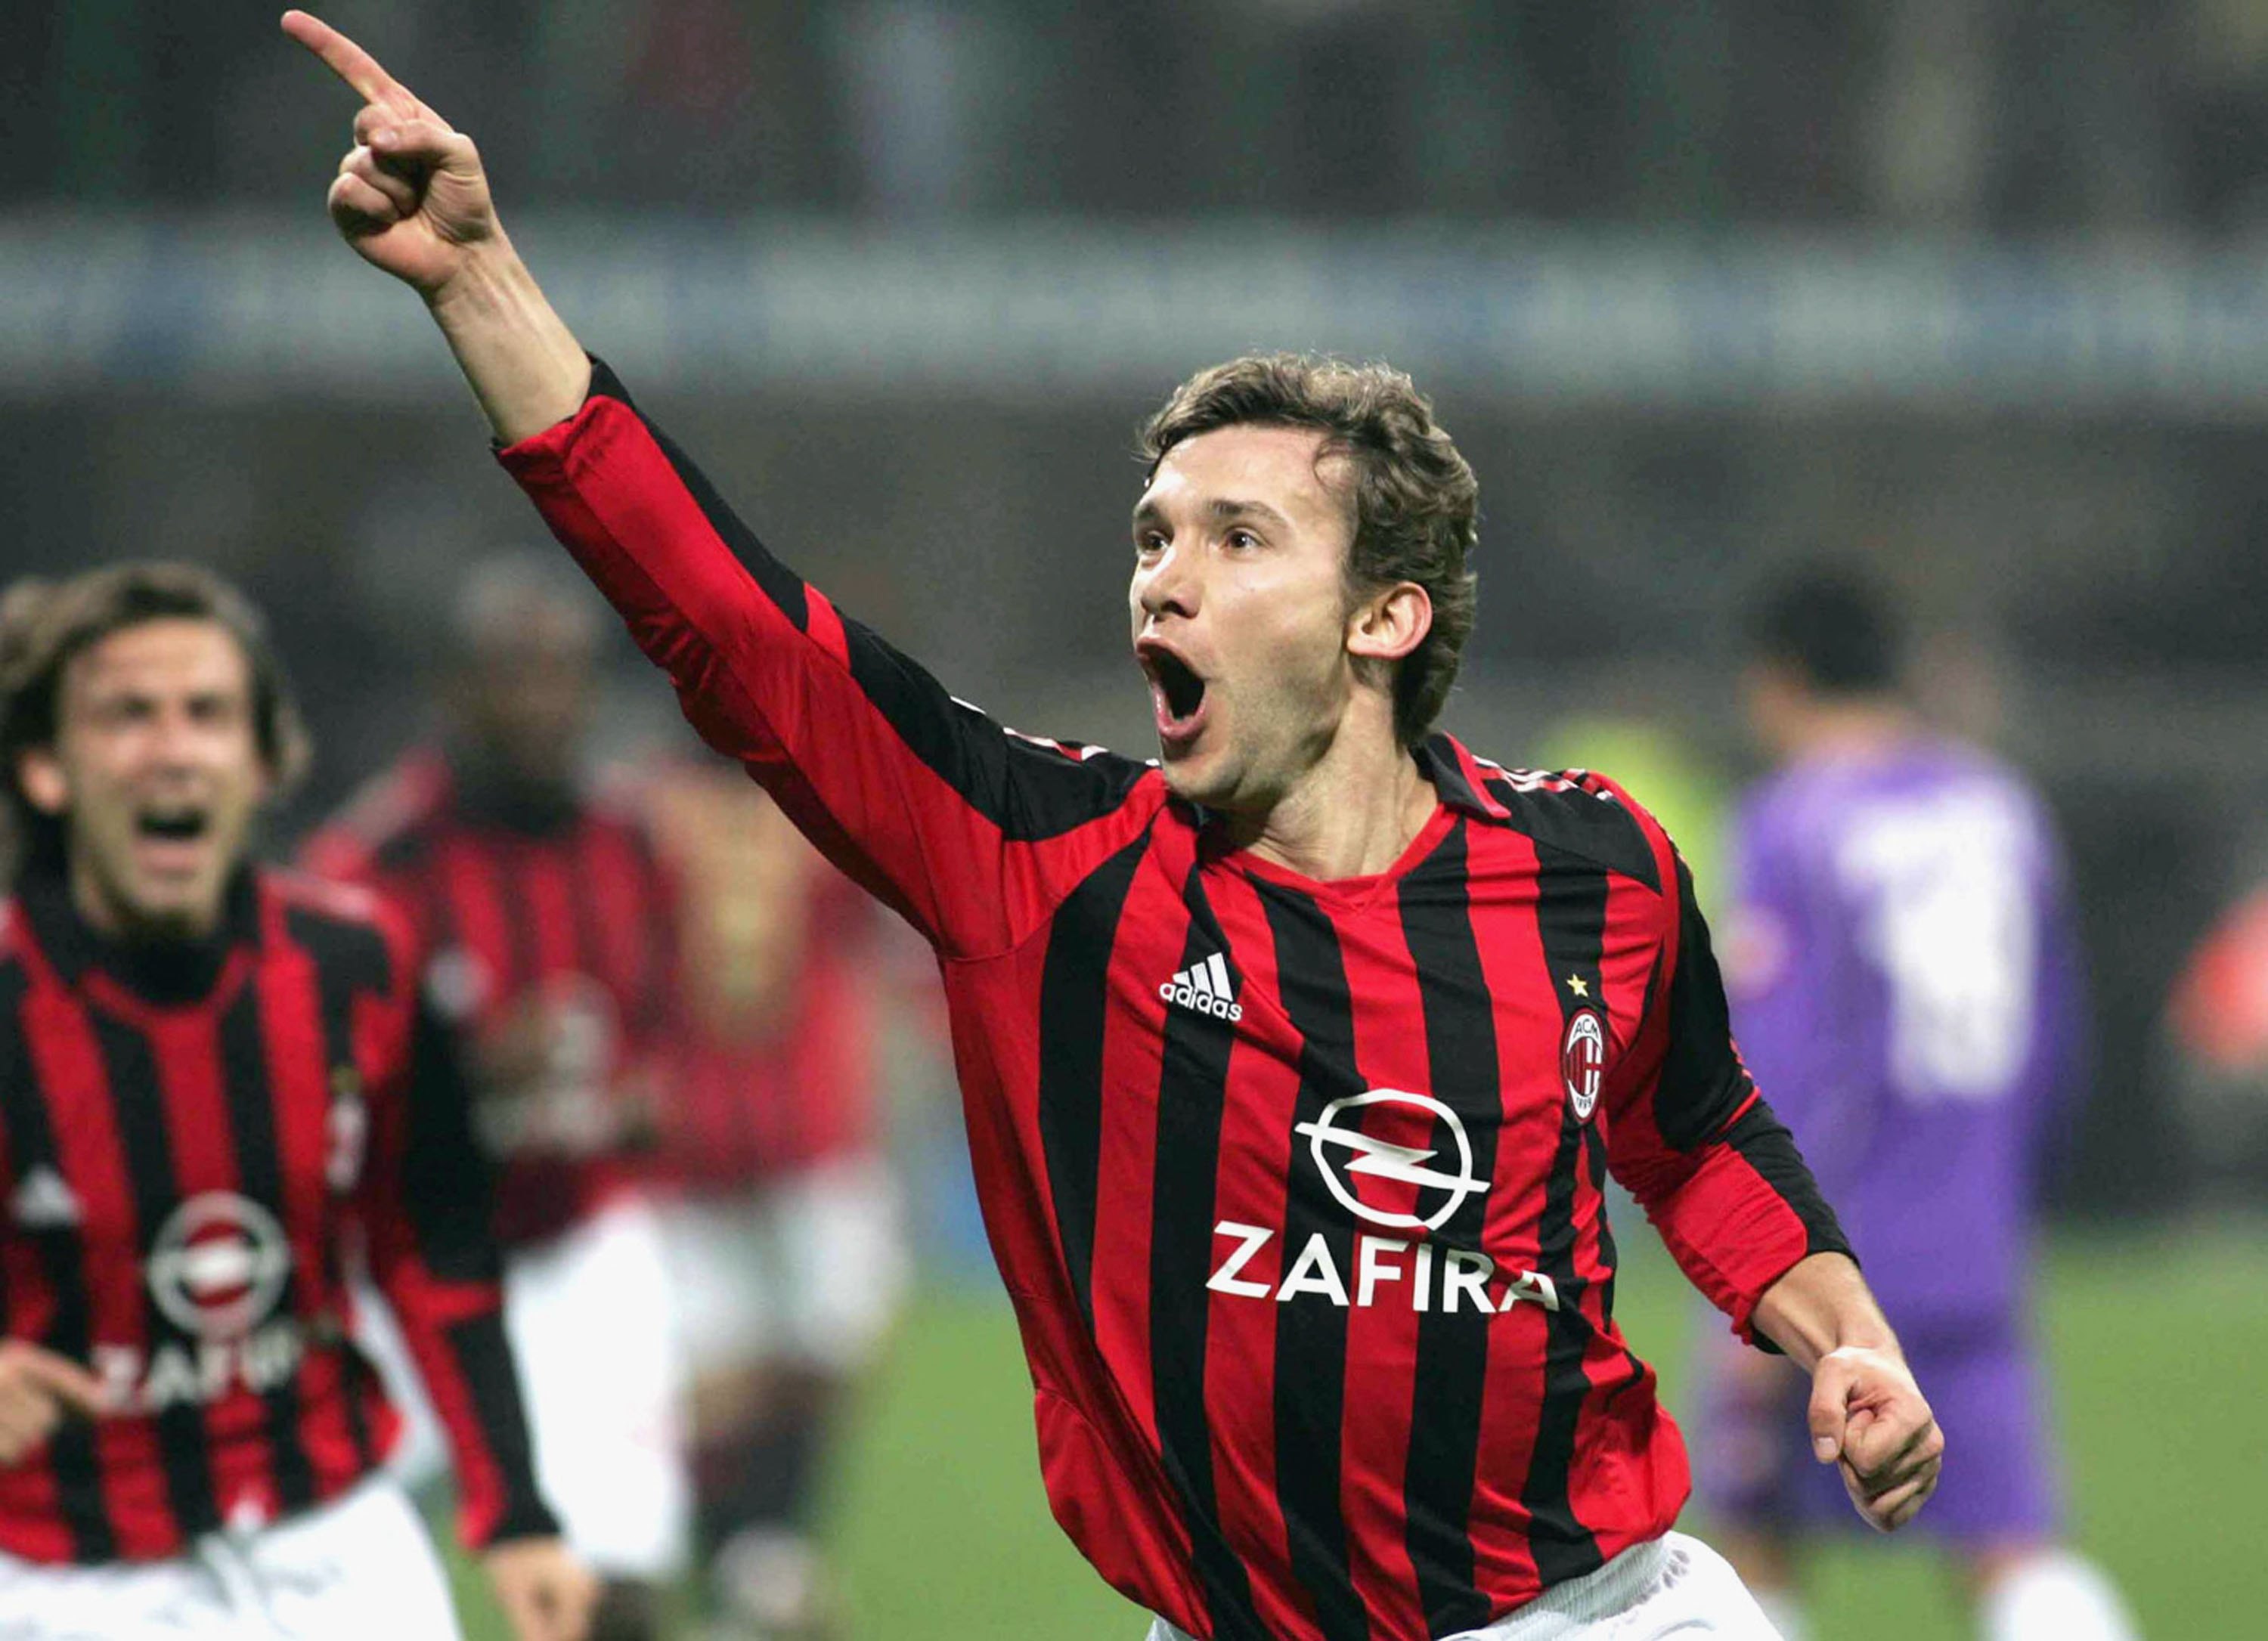 MILAN, ITLAY - MARCH 25:  Andriy Shevchenko of Milan celebrates his goal during the AC Milan v Fiorentina Serie A game on March 25, 2006 at the San Siro in Milan, Italy. (Photo by New Press/Getty Images)